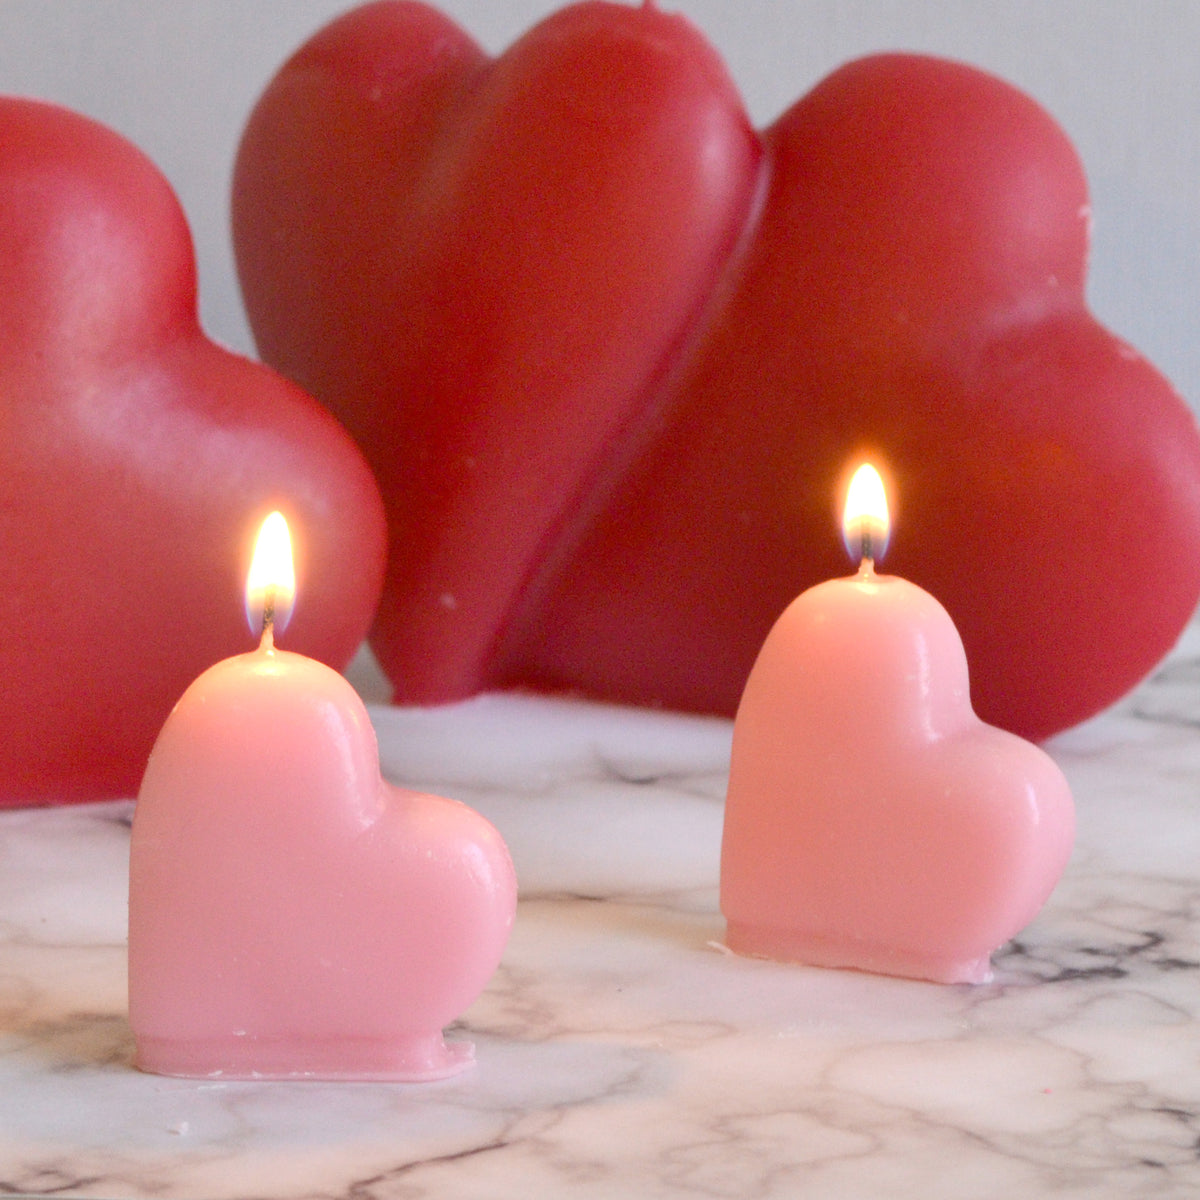 Three Little Hearts Heart Shaped Hot Pink Candles With Tray